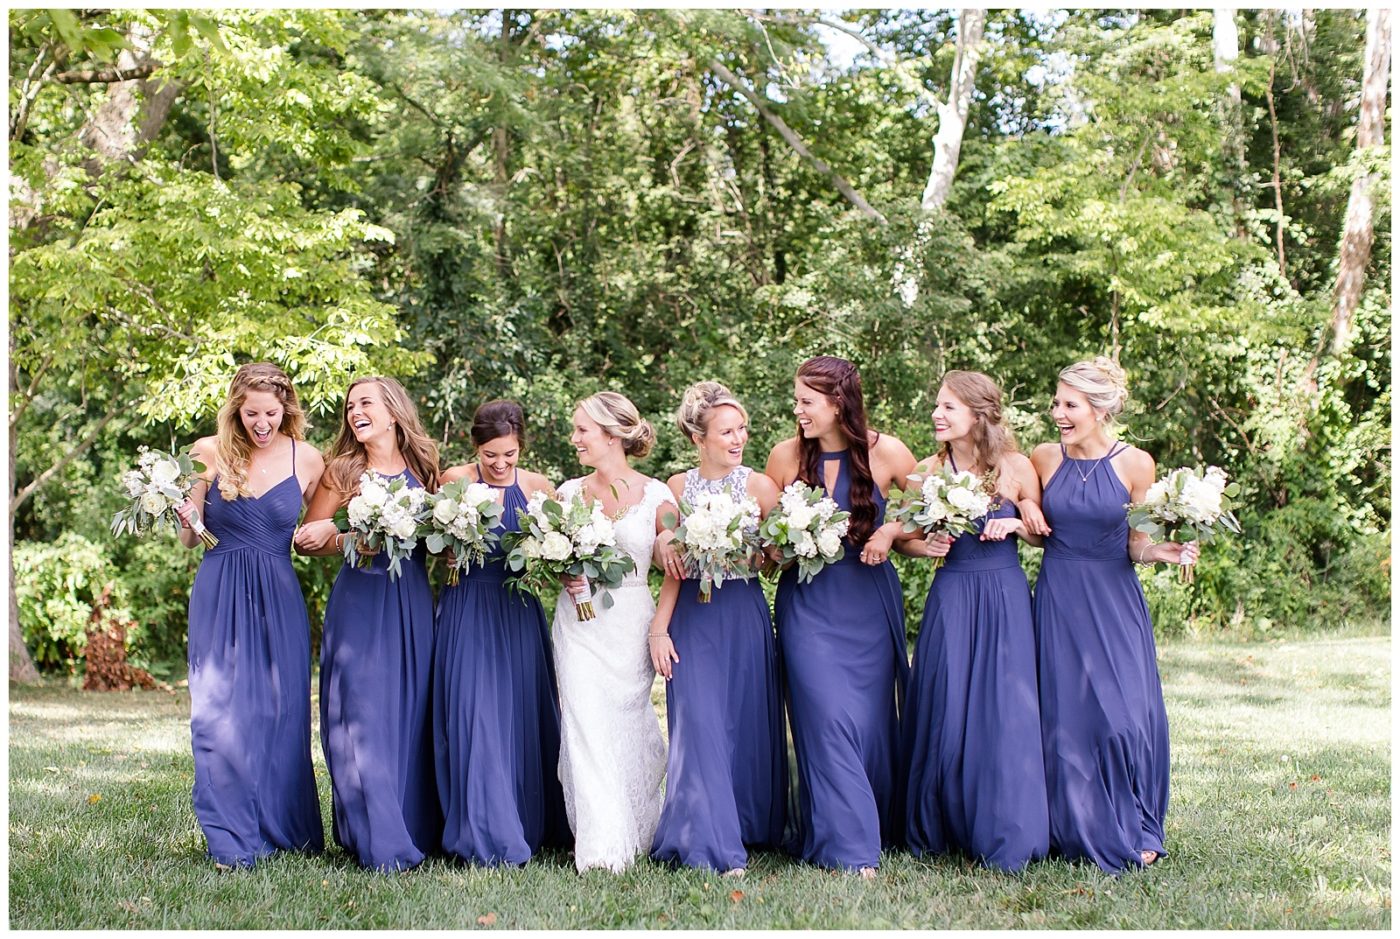 Bridesmaids linking arms and walking together while laughing and having fun together